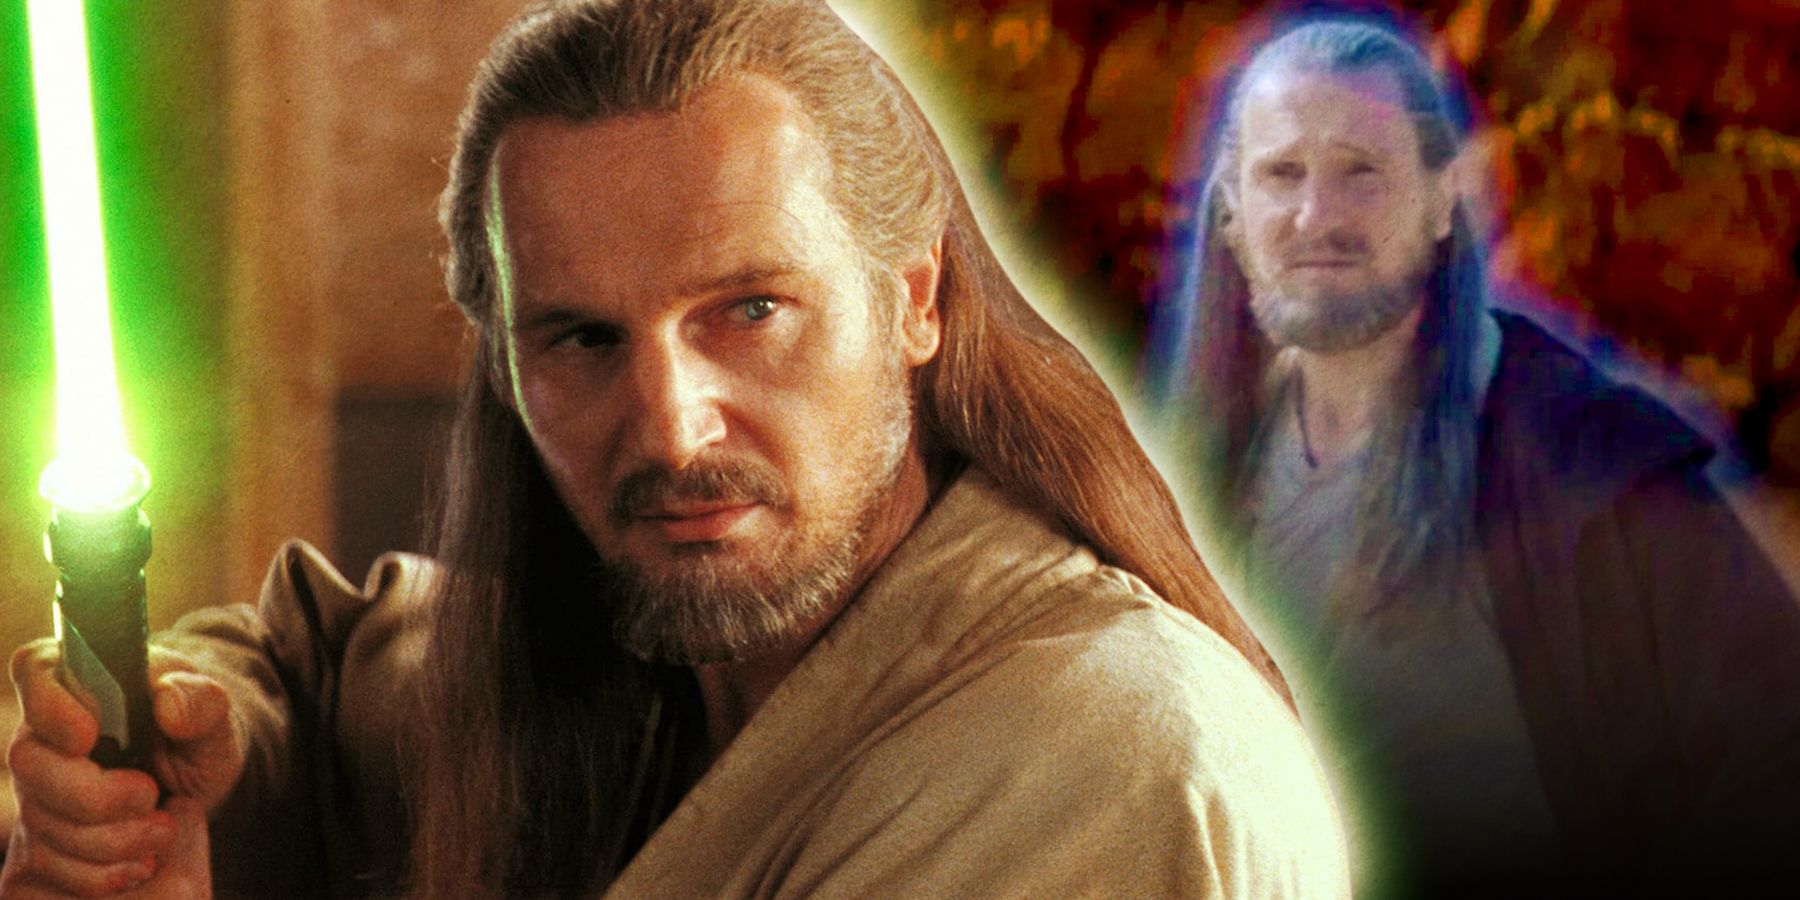 Liam Neeson's Qui-Gon Jinn in front of his Force ghost